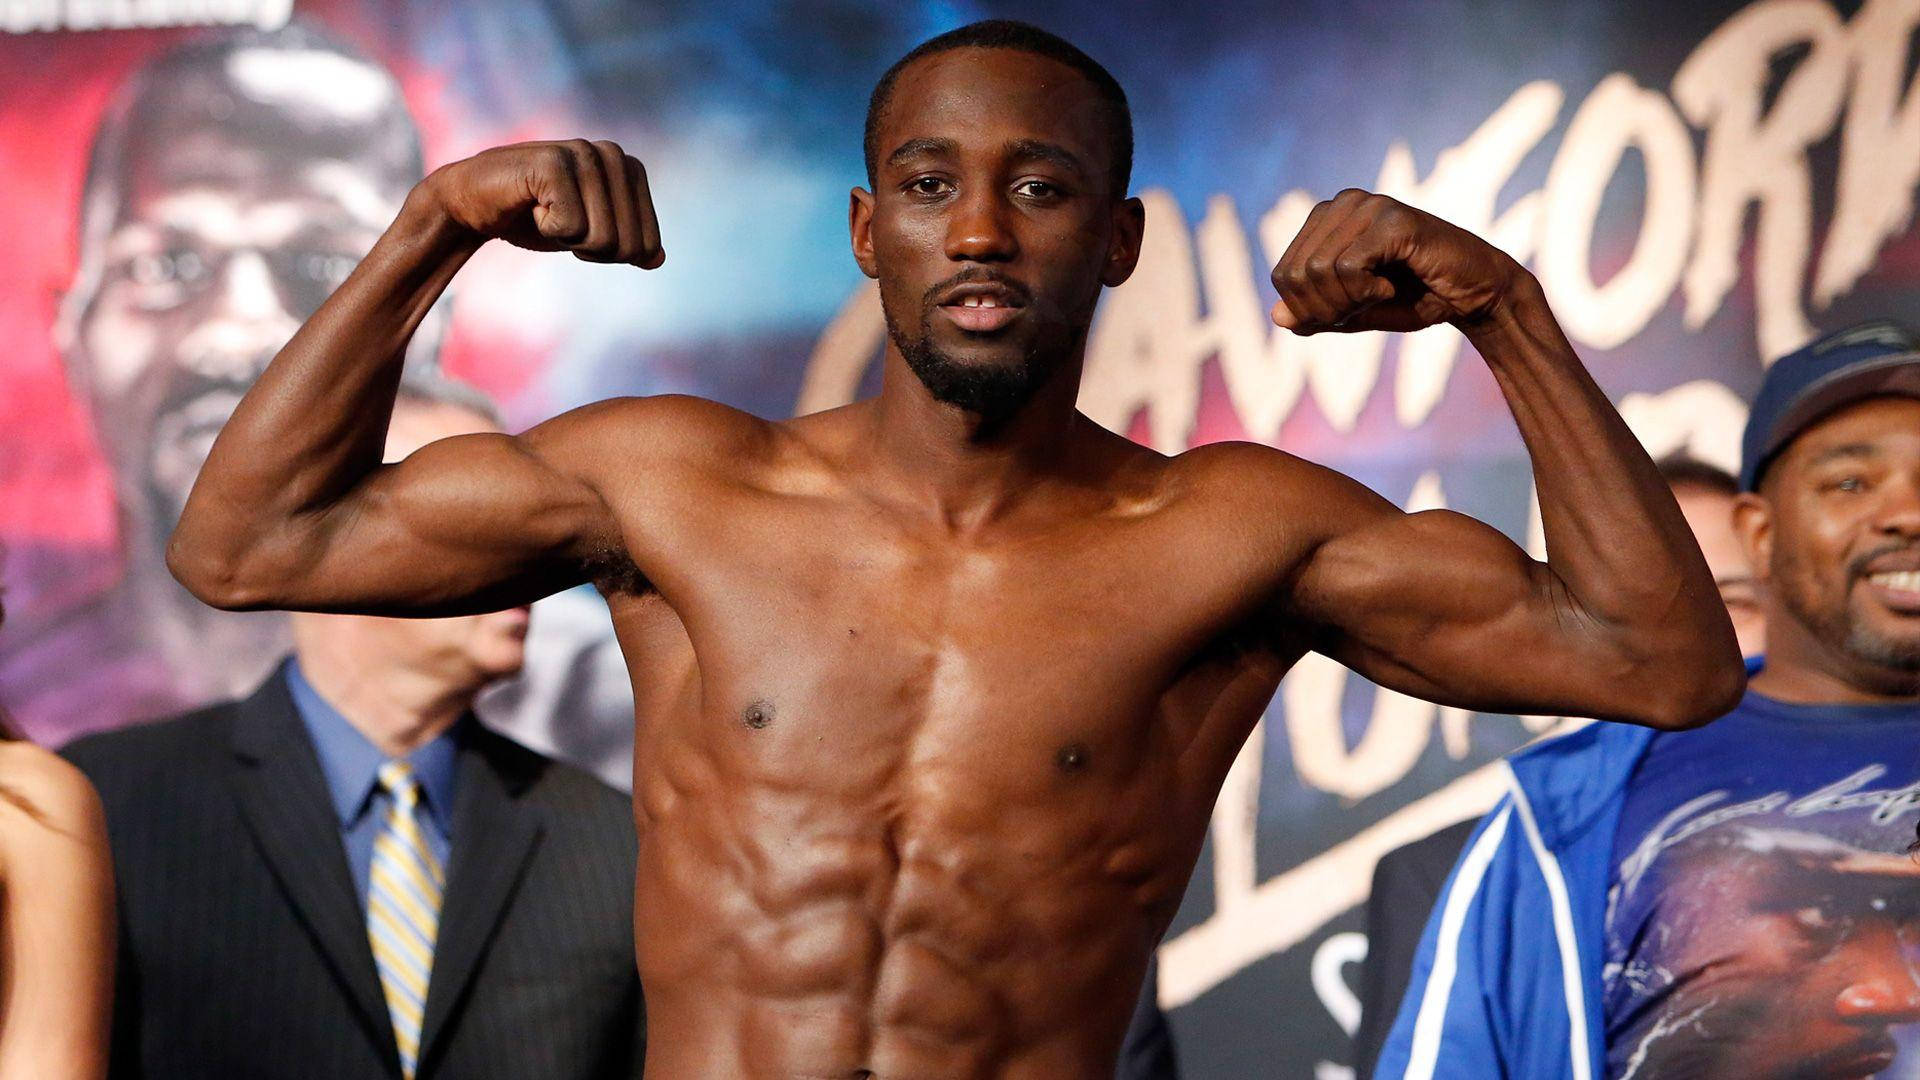 Terencecrawfords Starka Armar. (this Could Be A Description Or Caption For A Computer Or Mobile Wallpaper Featuring Terence Crawford And Emphasizes His Strong Arms.) Wallpaper